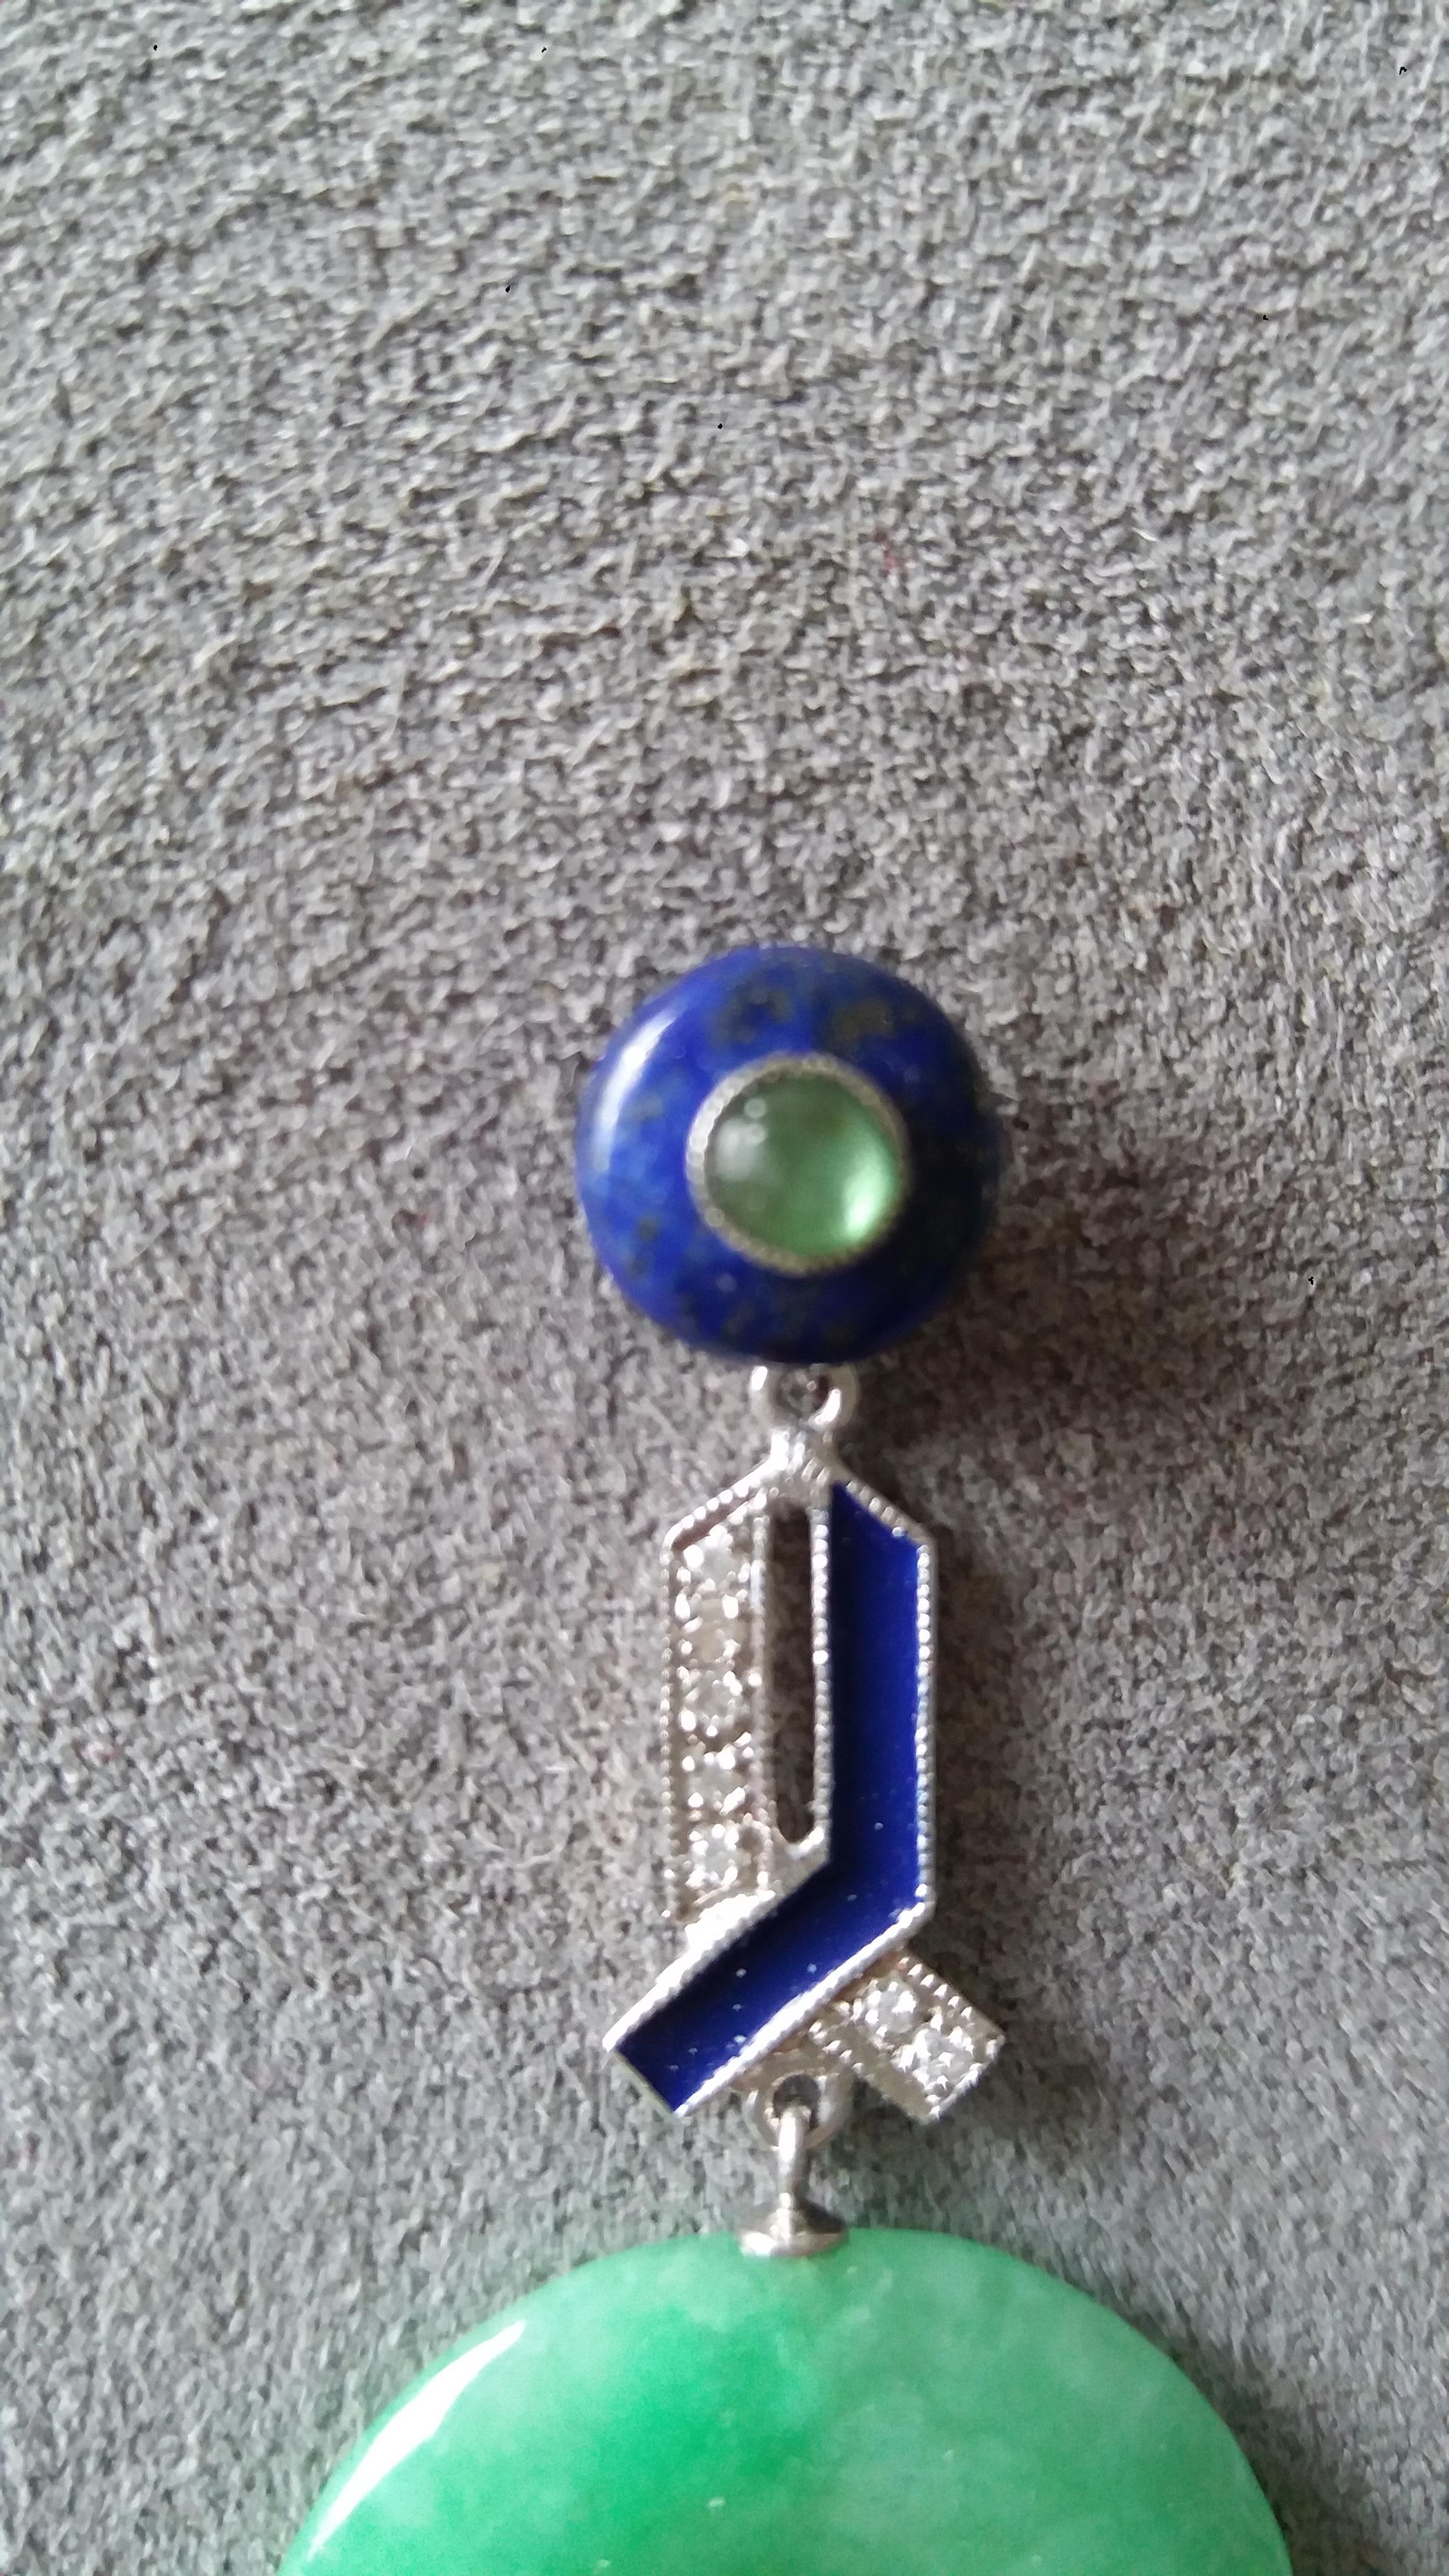 2 round  Lapis Lazuli buttons with small emeralds cabochons  in the center,middle parts in white gold, 14 round full cut diamonds,blue enamel, 2 Burma Jade donuts.
Length 46 mm
Width 21 mm
Weight 8 grams
In 1978 our workshop started in Italy to make